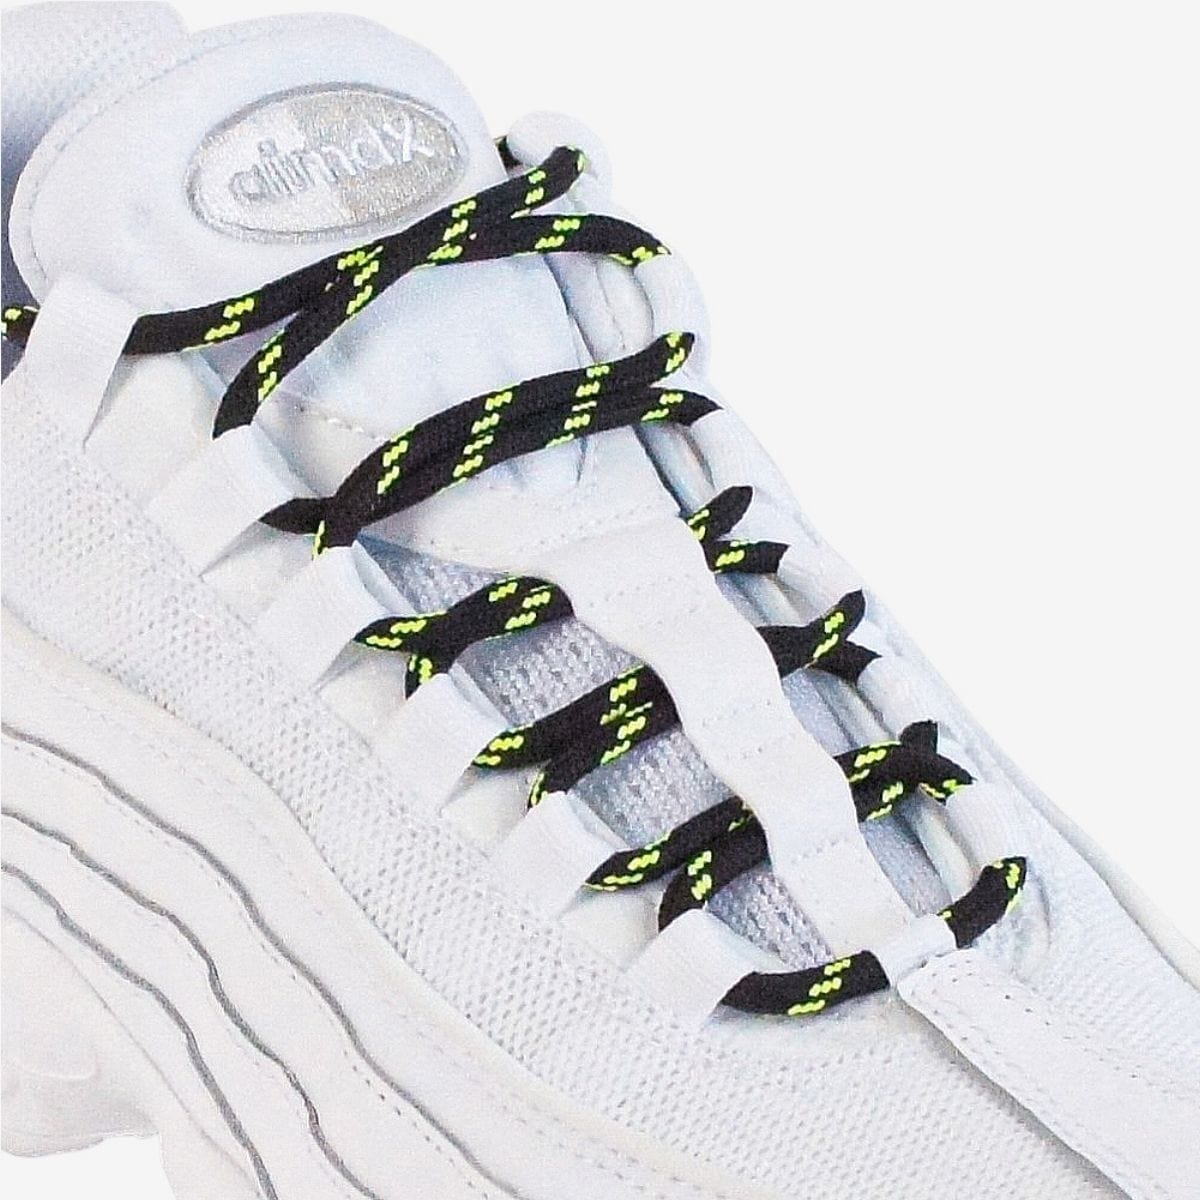 walking-shoe-laces-online-in-australia-colour-black-and-green